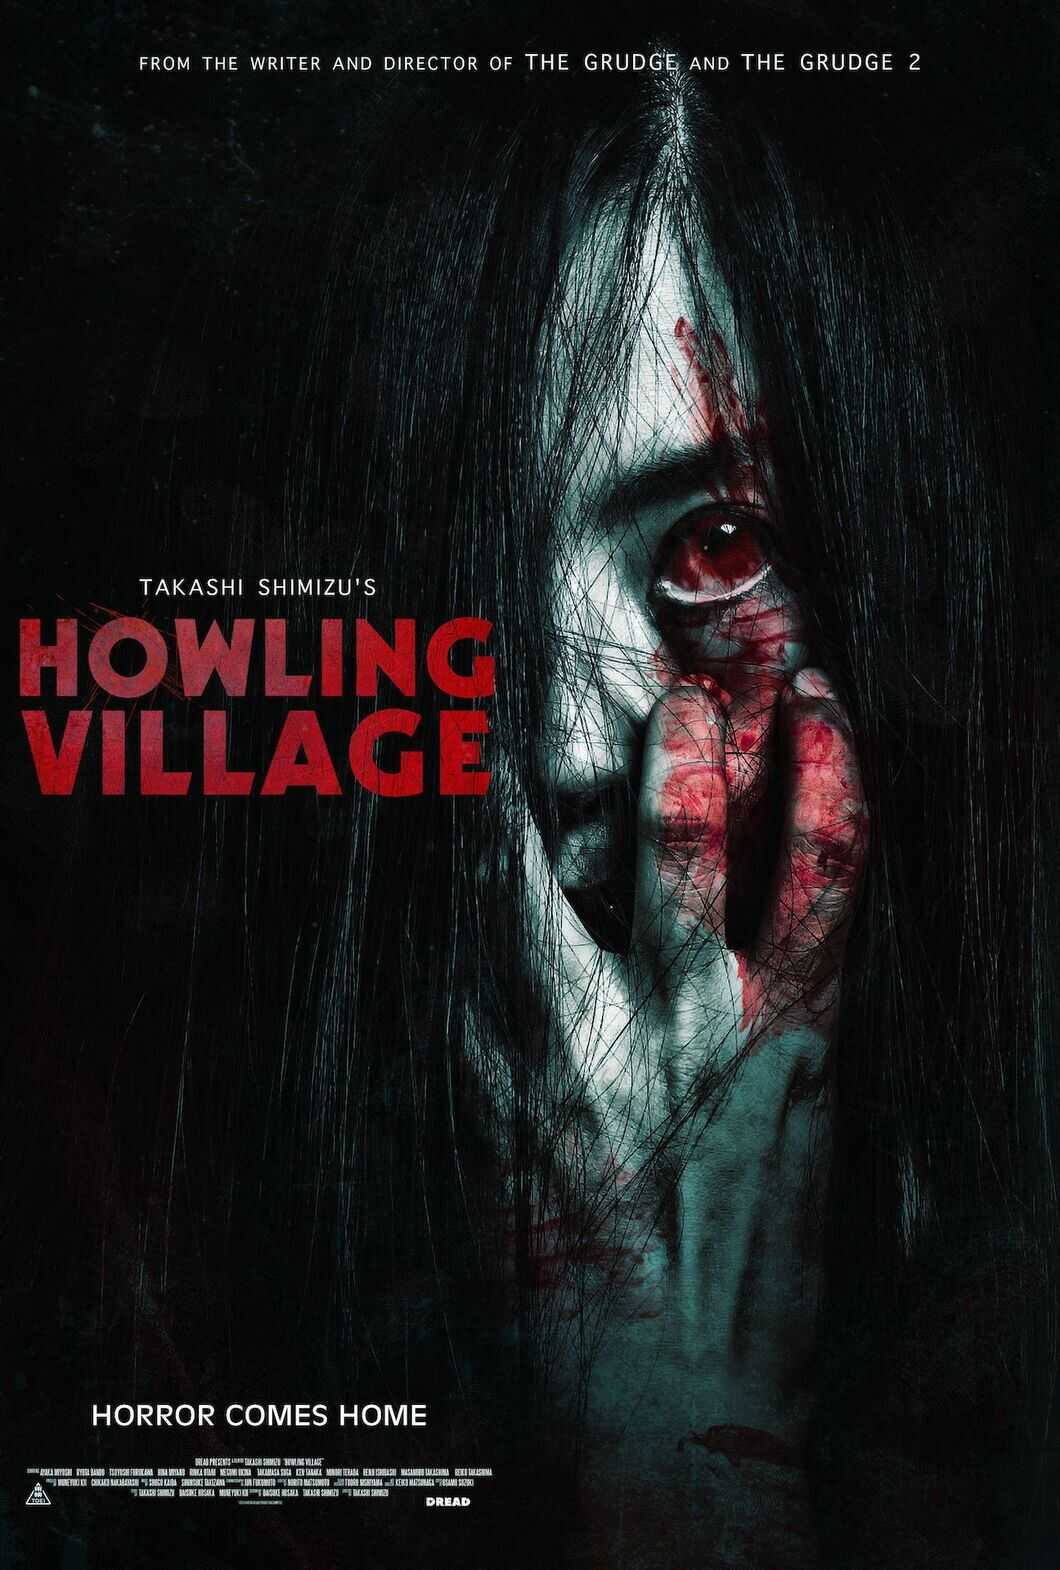 The theatrical poster for director Takashi Shimizu's Howling Village.